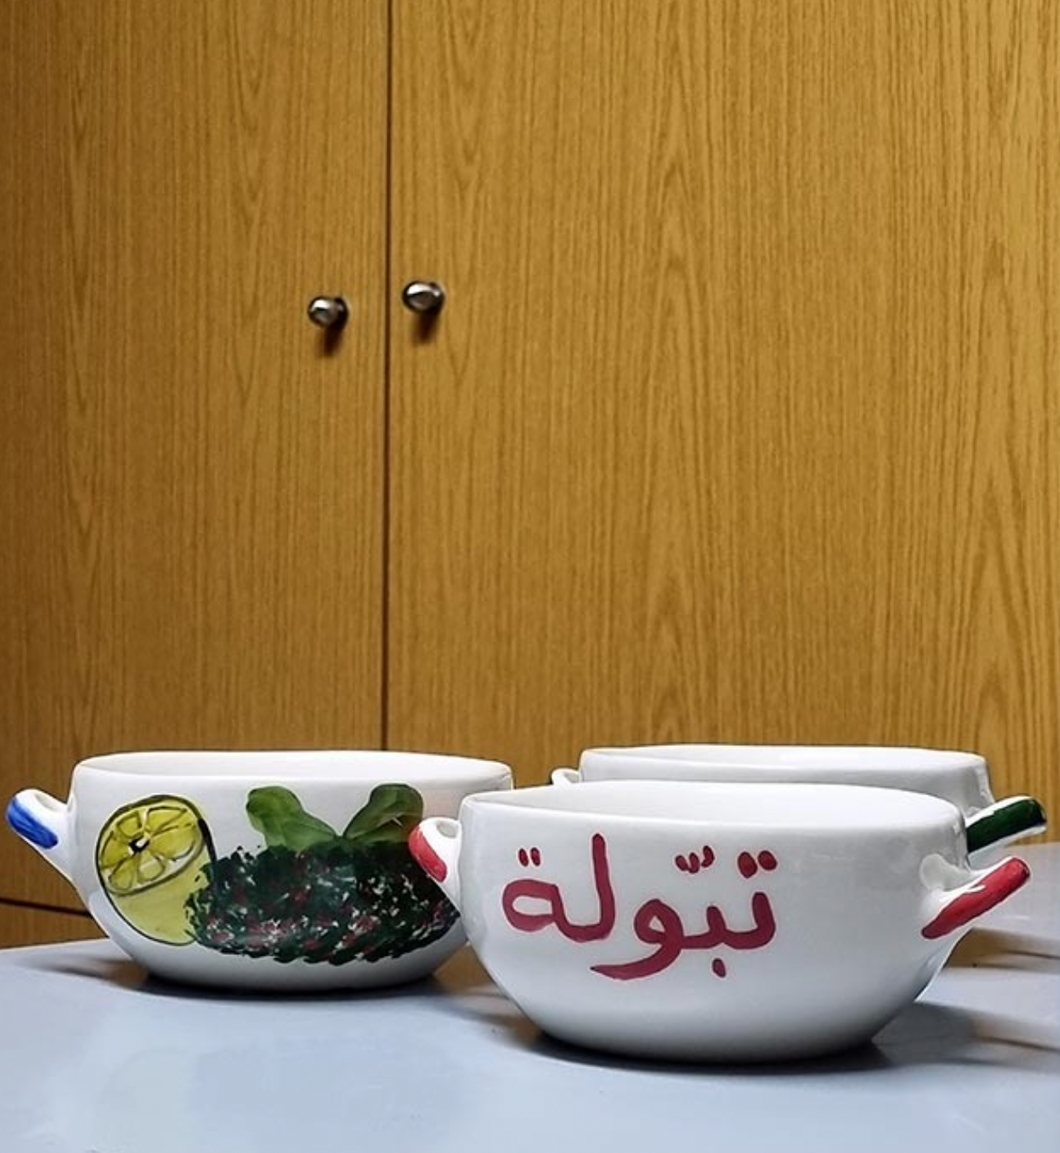 Hand Painted Tabbouli Ceramic Bowls